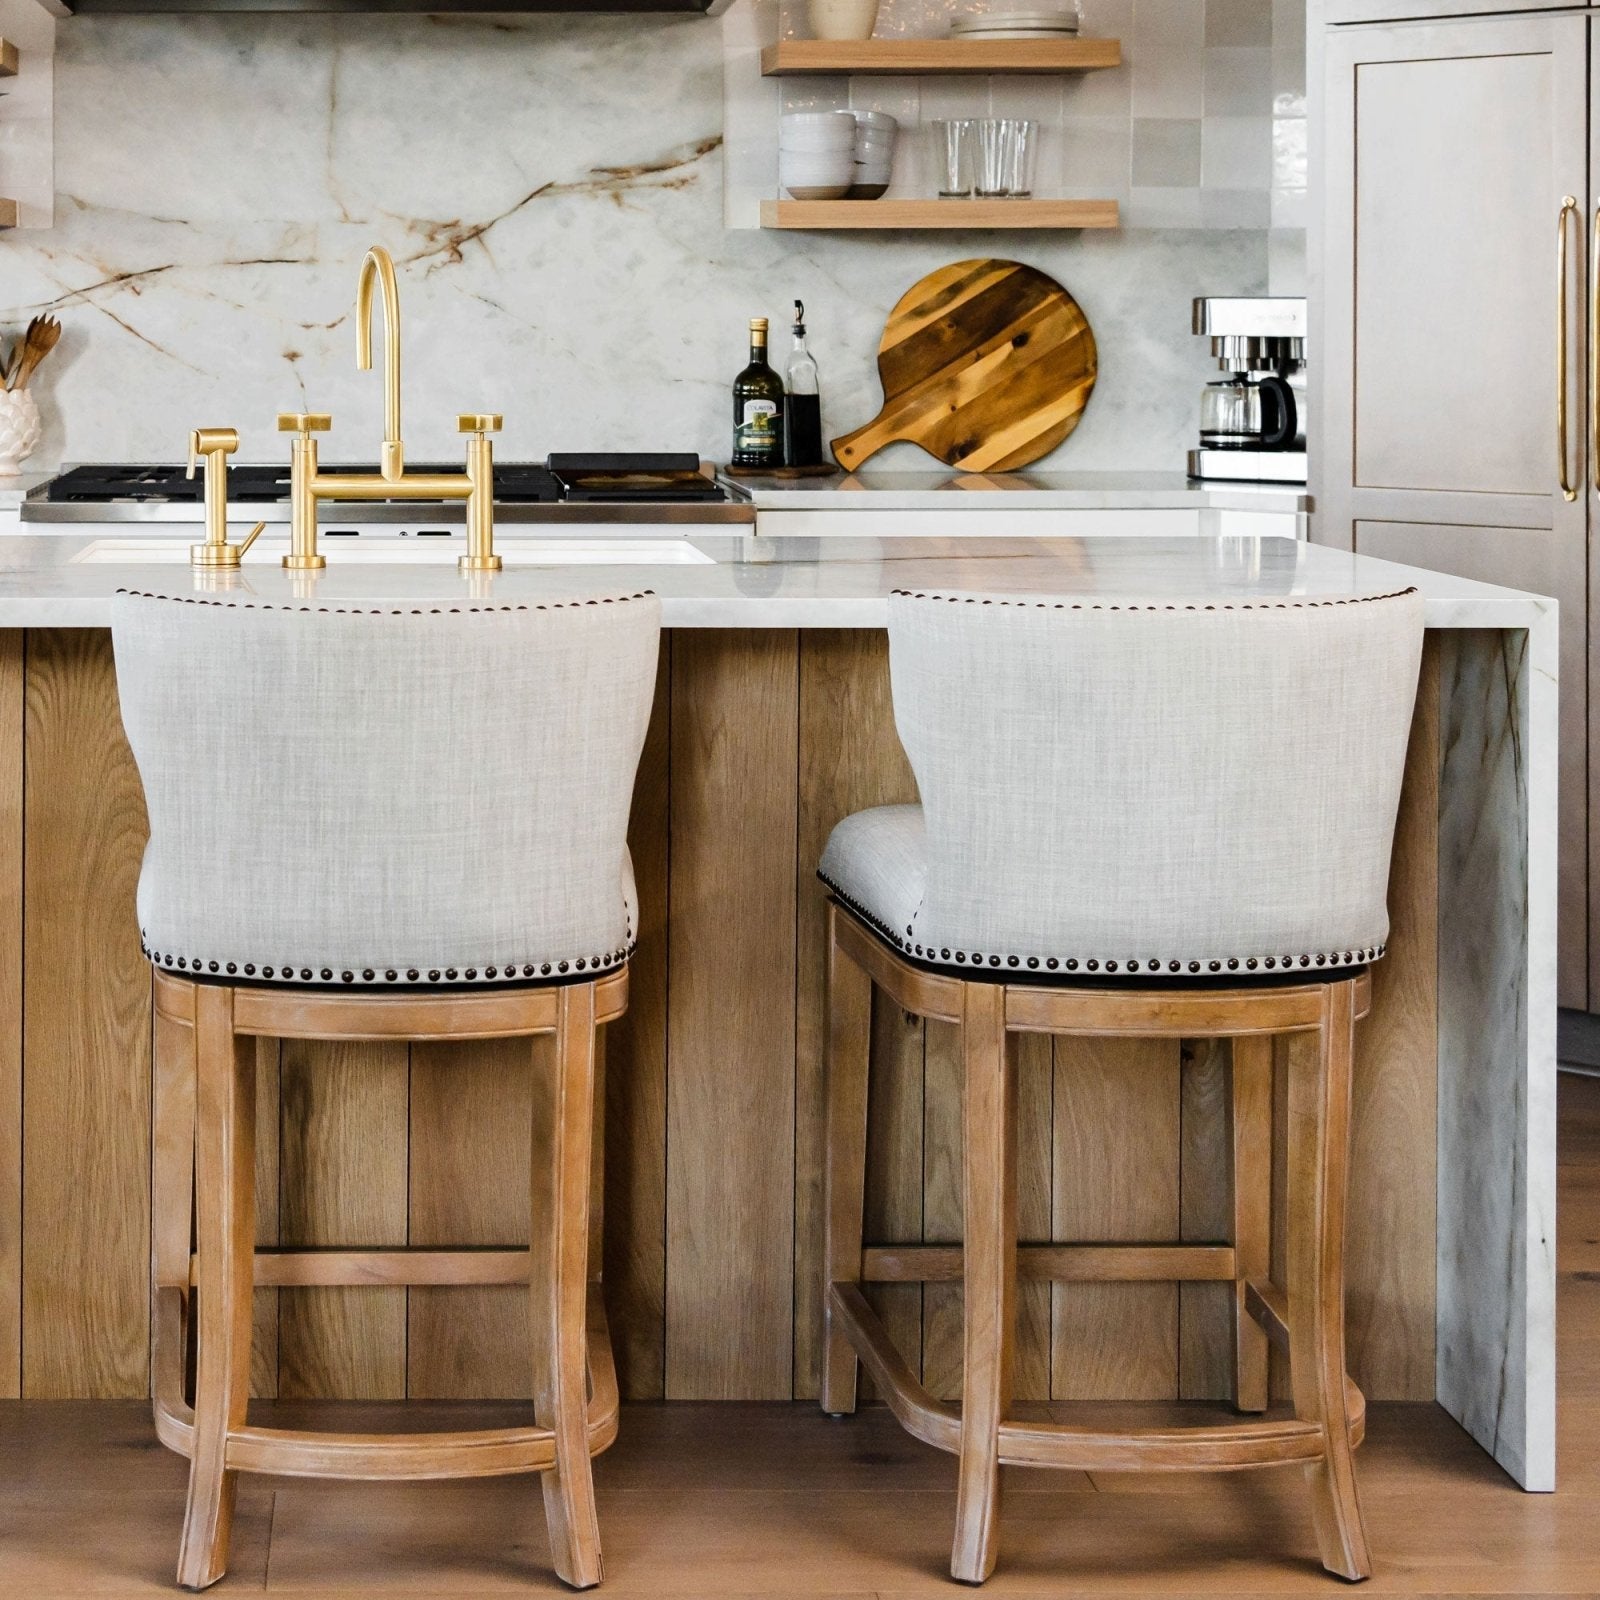 Hugo Counter Stool in Weathered Oak Finish with Sand Color Fabric Upholstery in Stools by Maven Lane